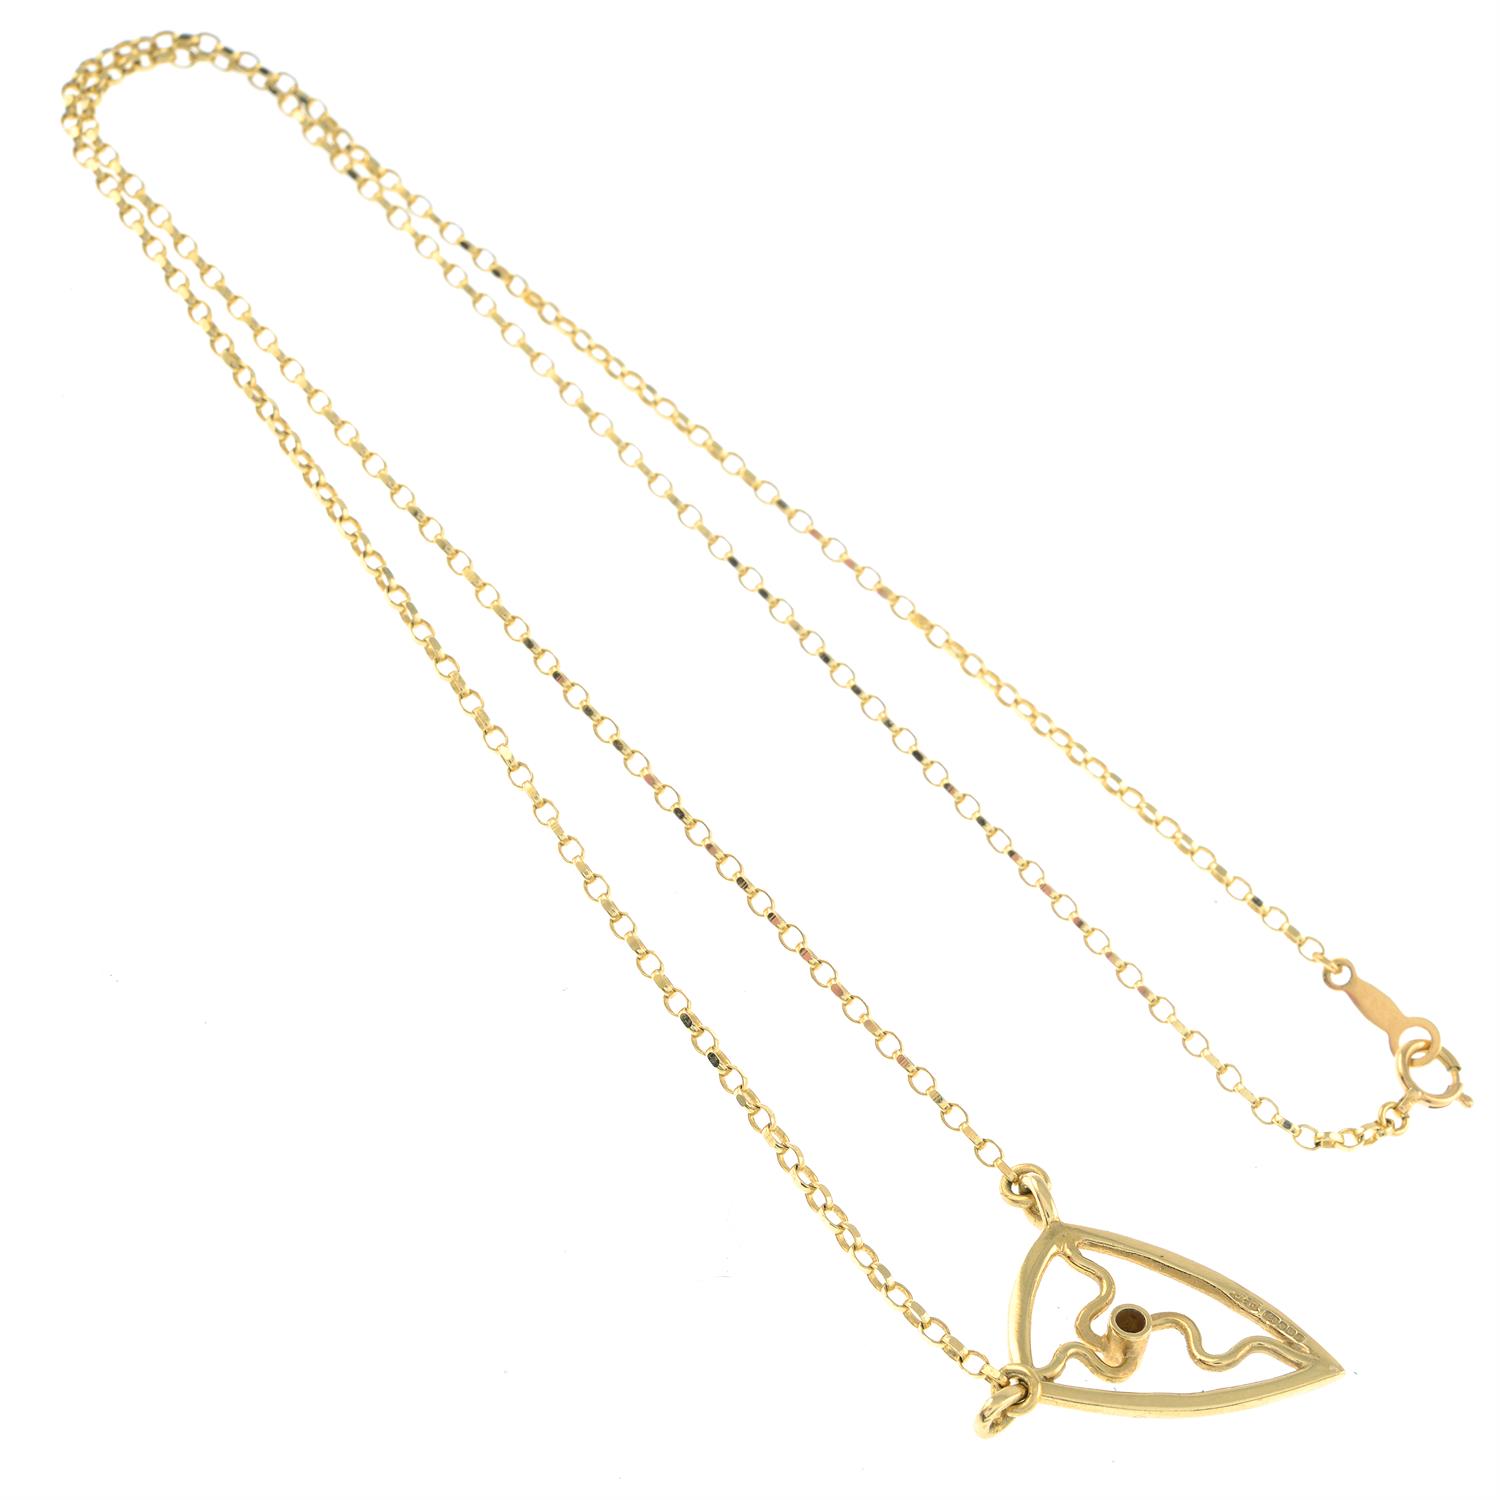 18ct gold diamond necklace - Image 2 of 2